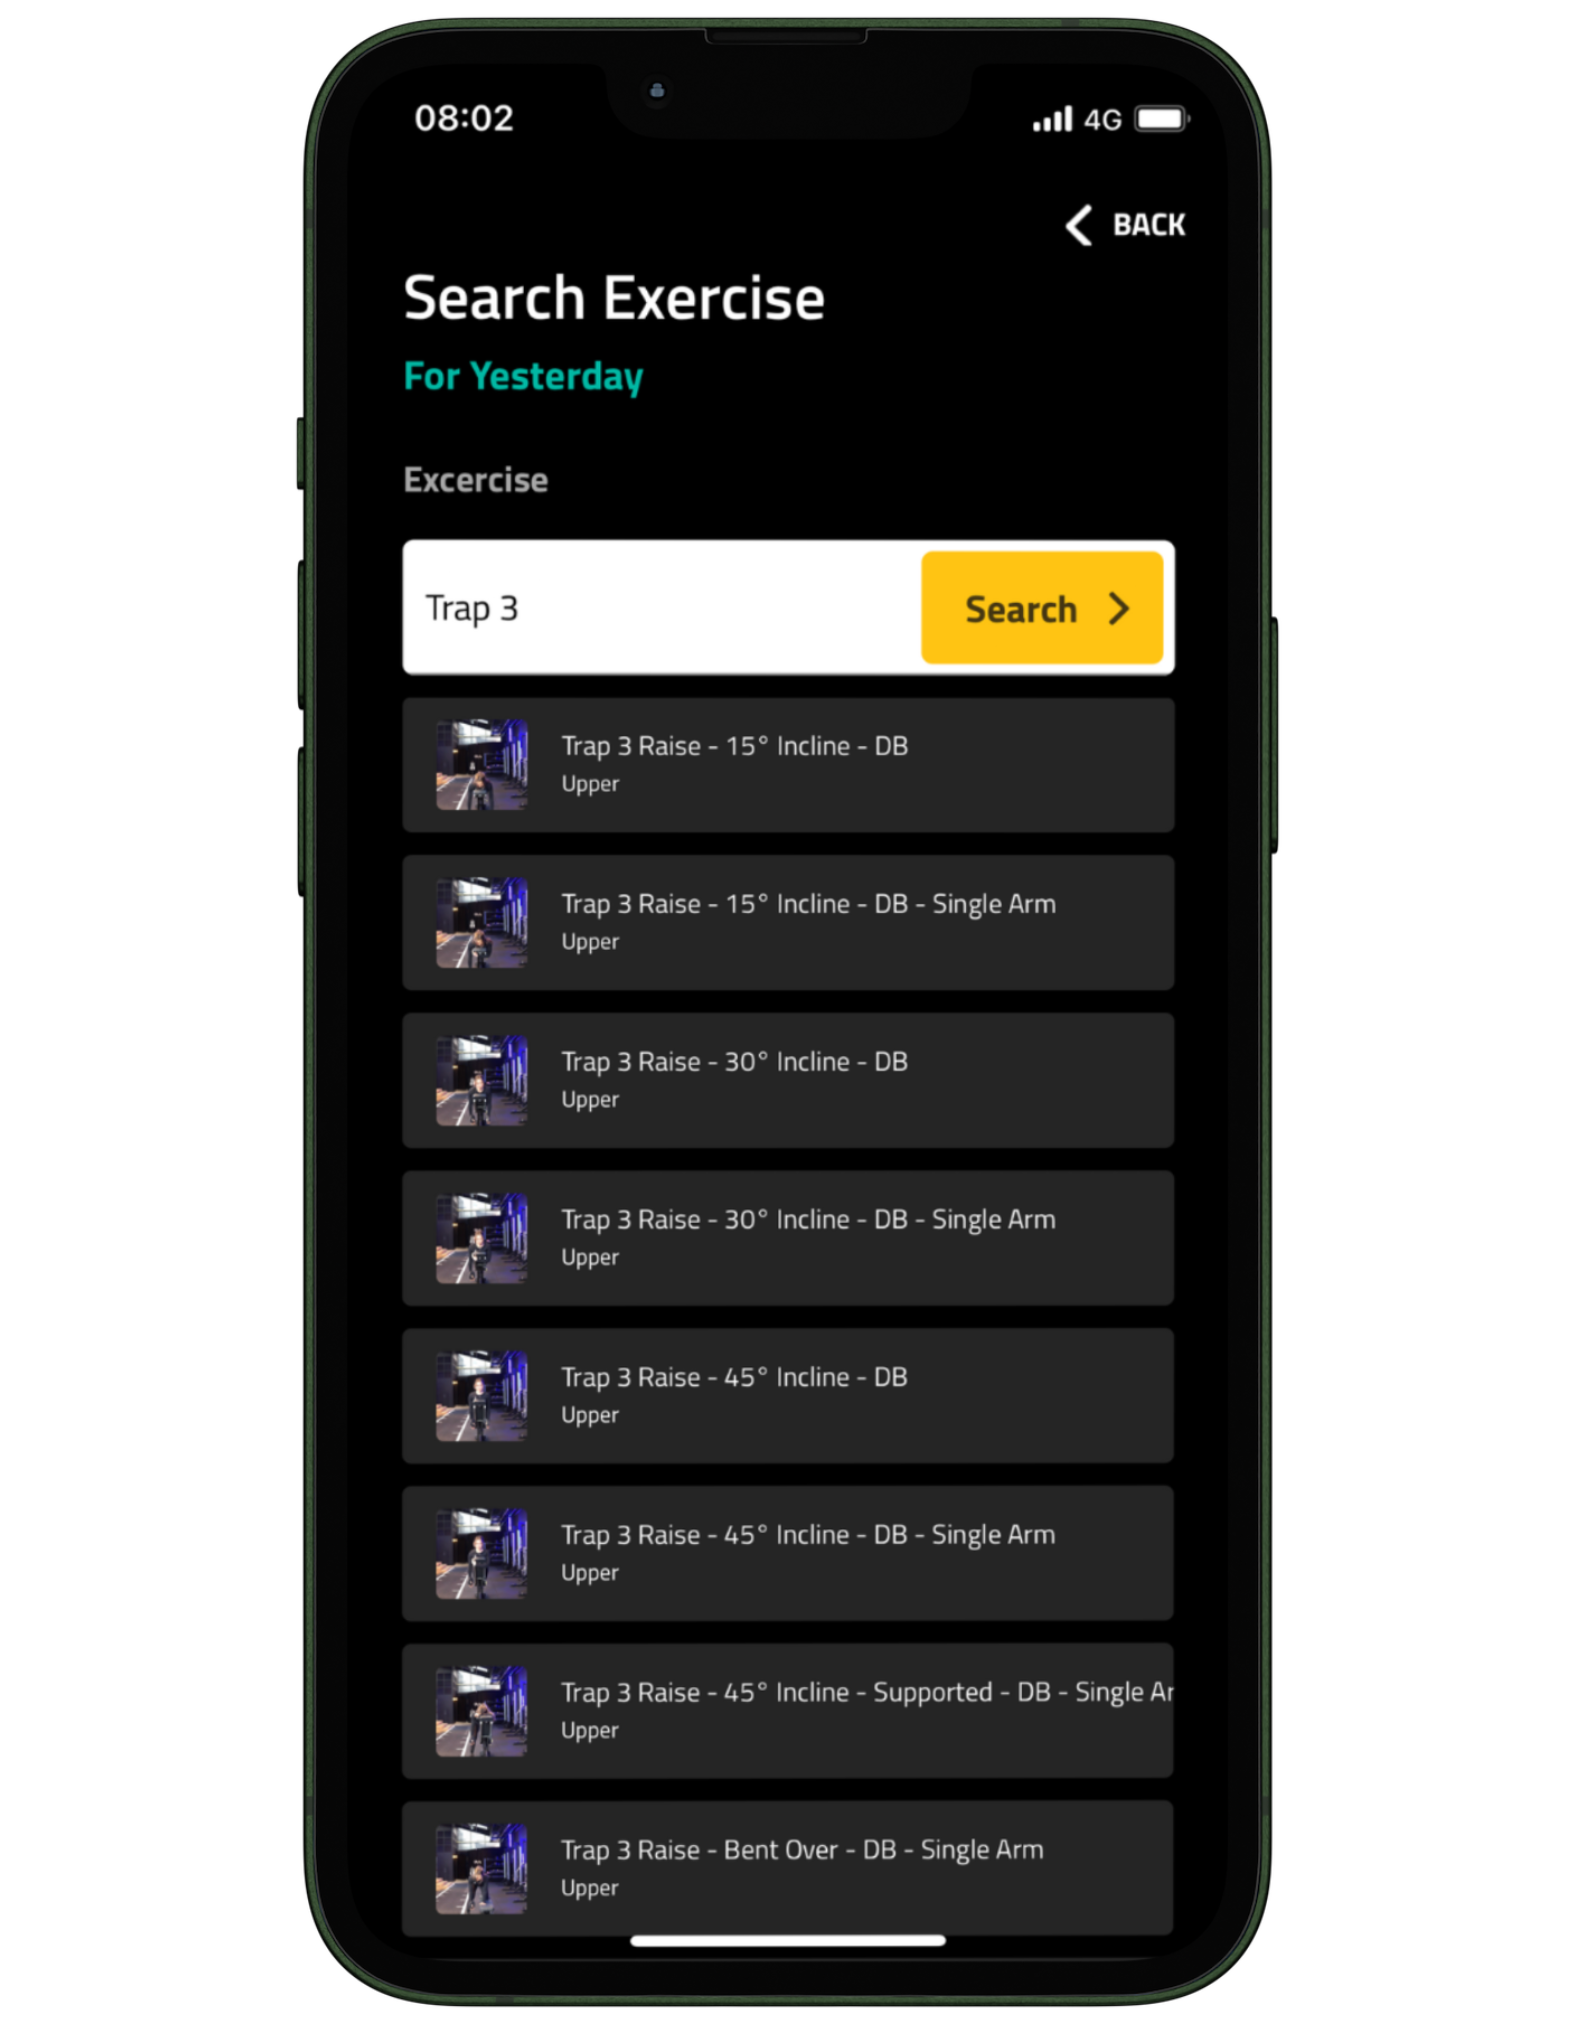 1900+ exercise library with an option to add your own exercises